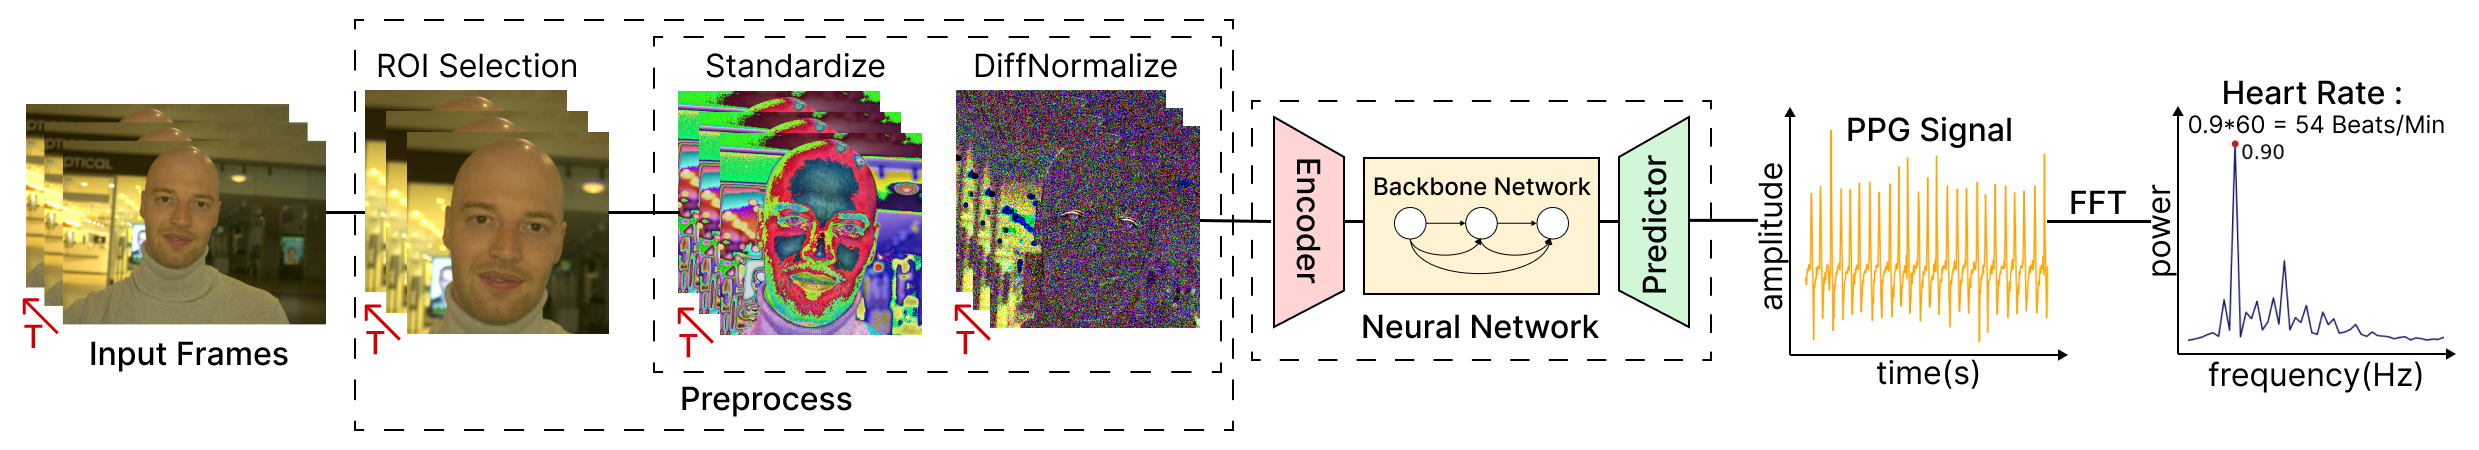 Camera-Based Remote Physiology Sensing for Hundreds of Subjects Across Skin Tones